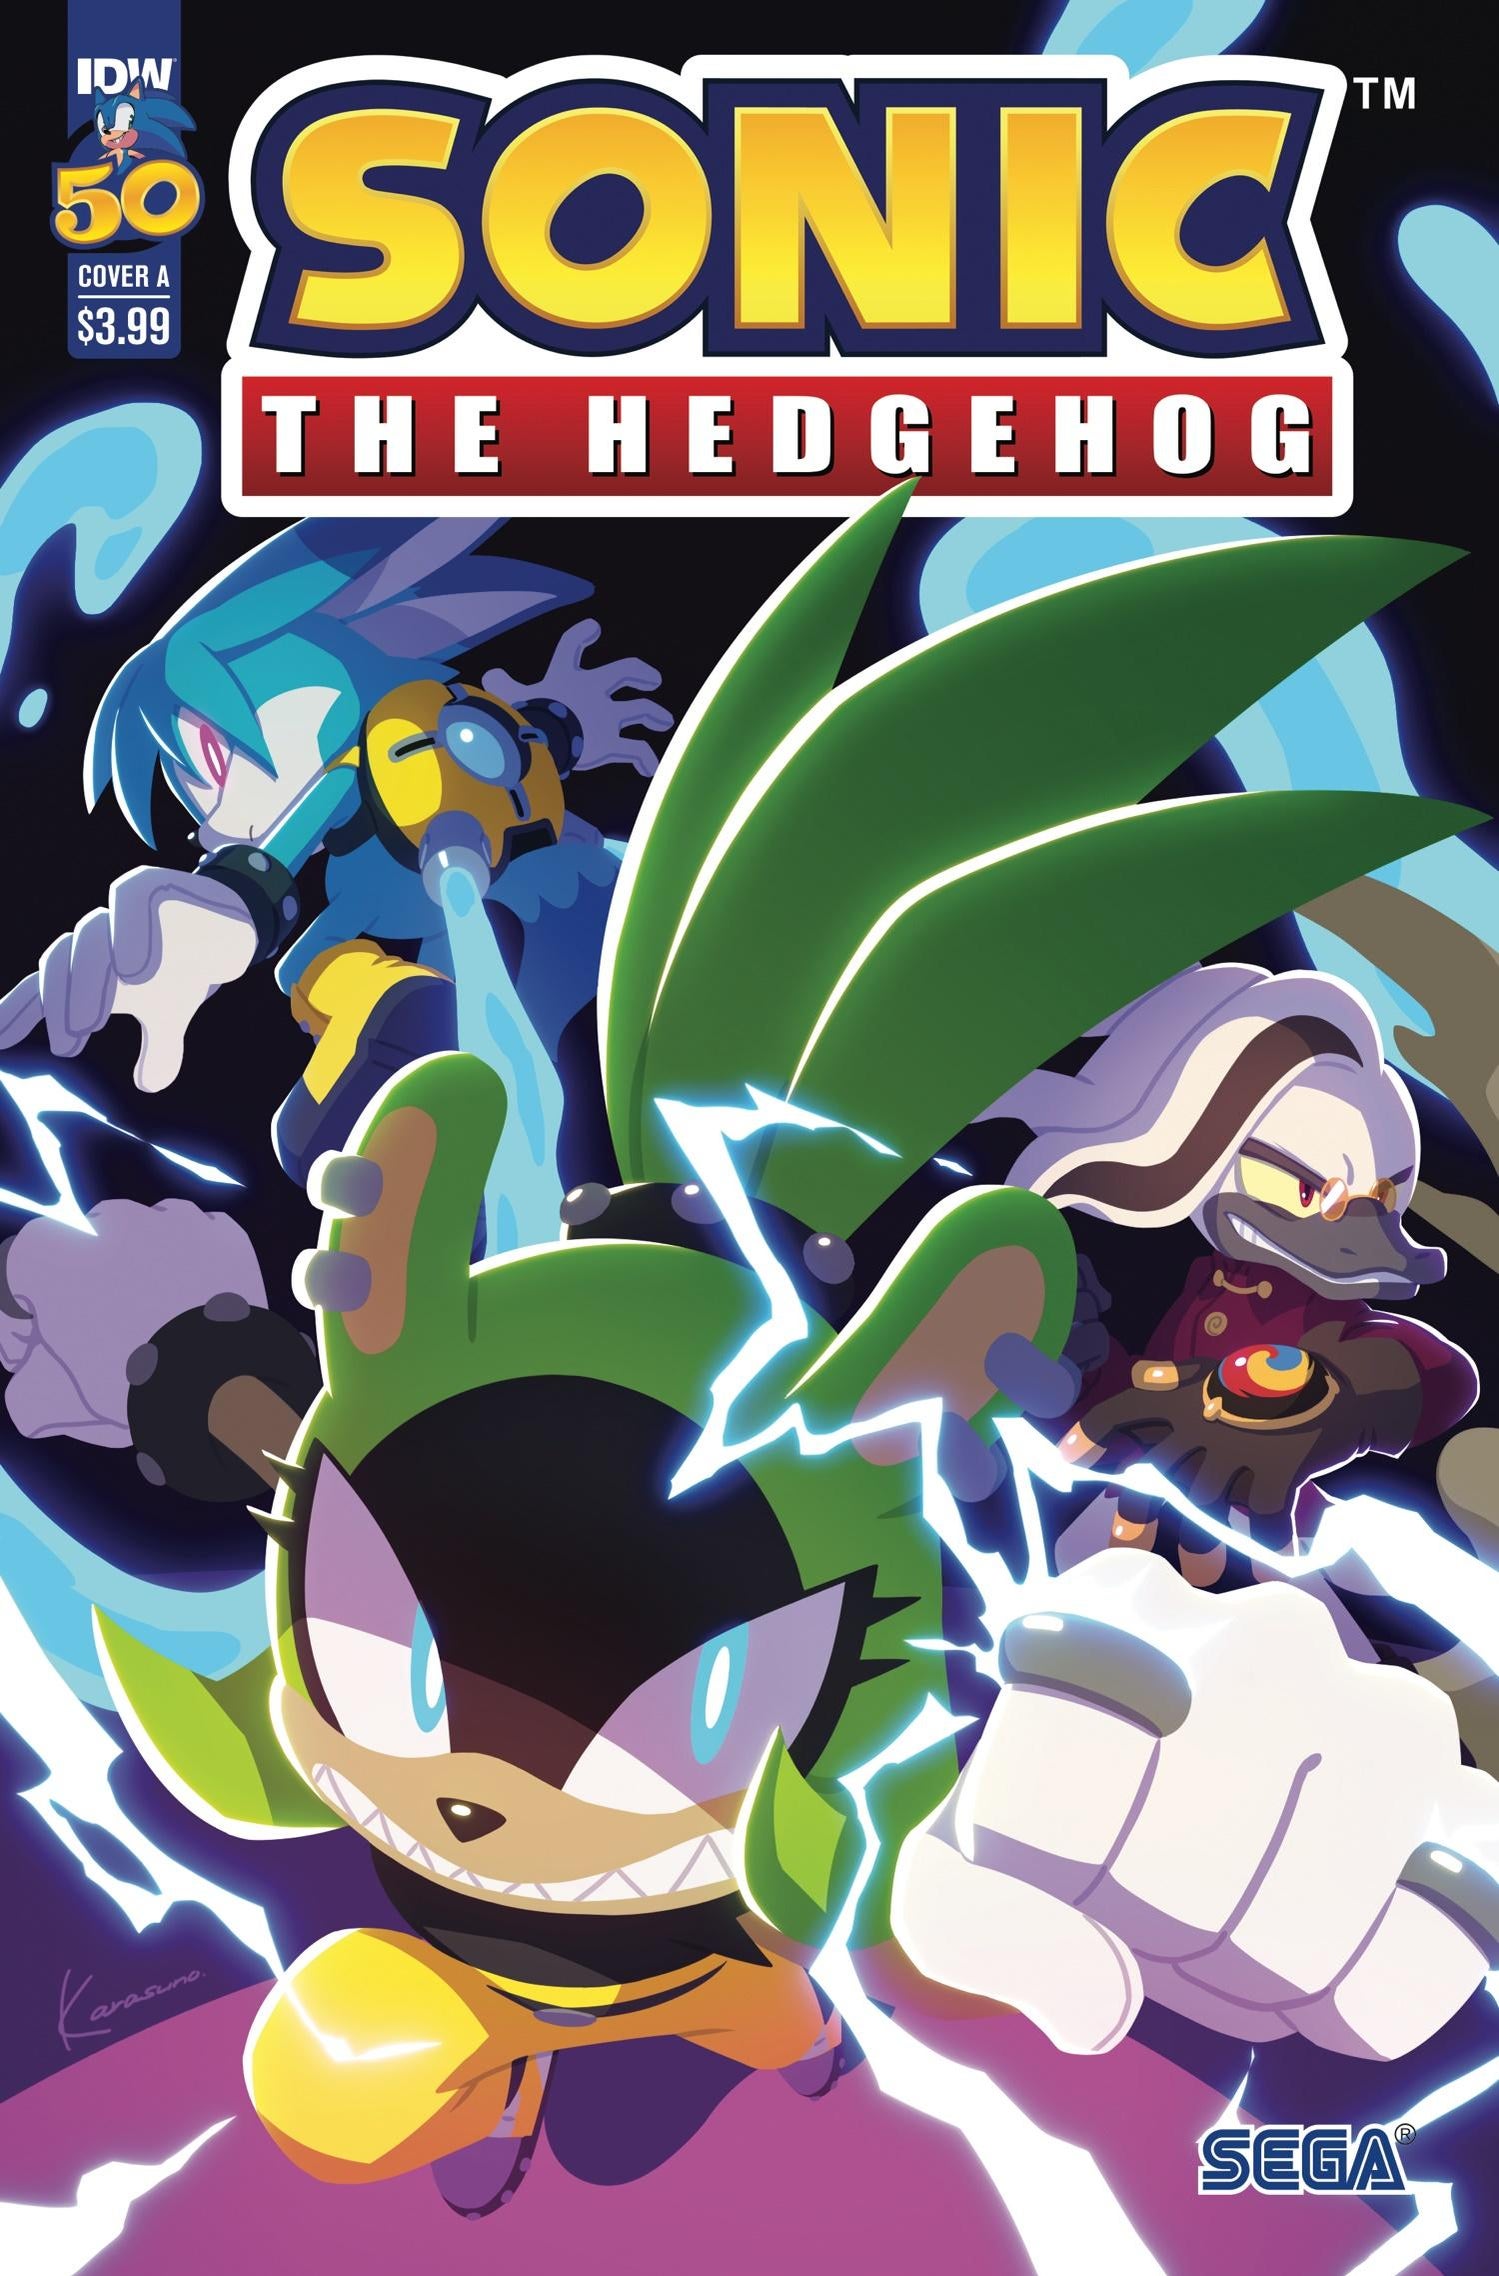 Inside The Pages: Sonic IDW Bad Guys #3